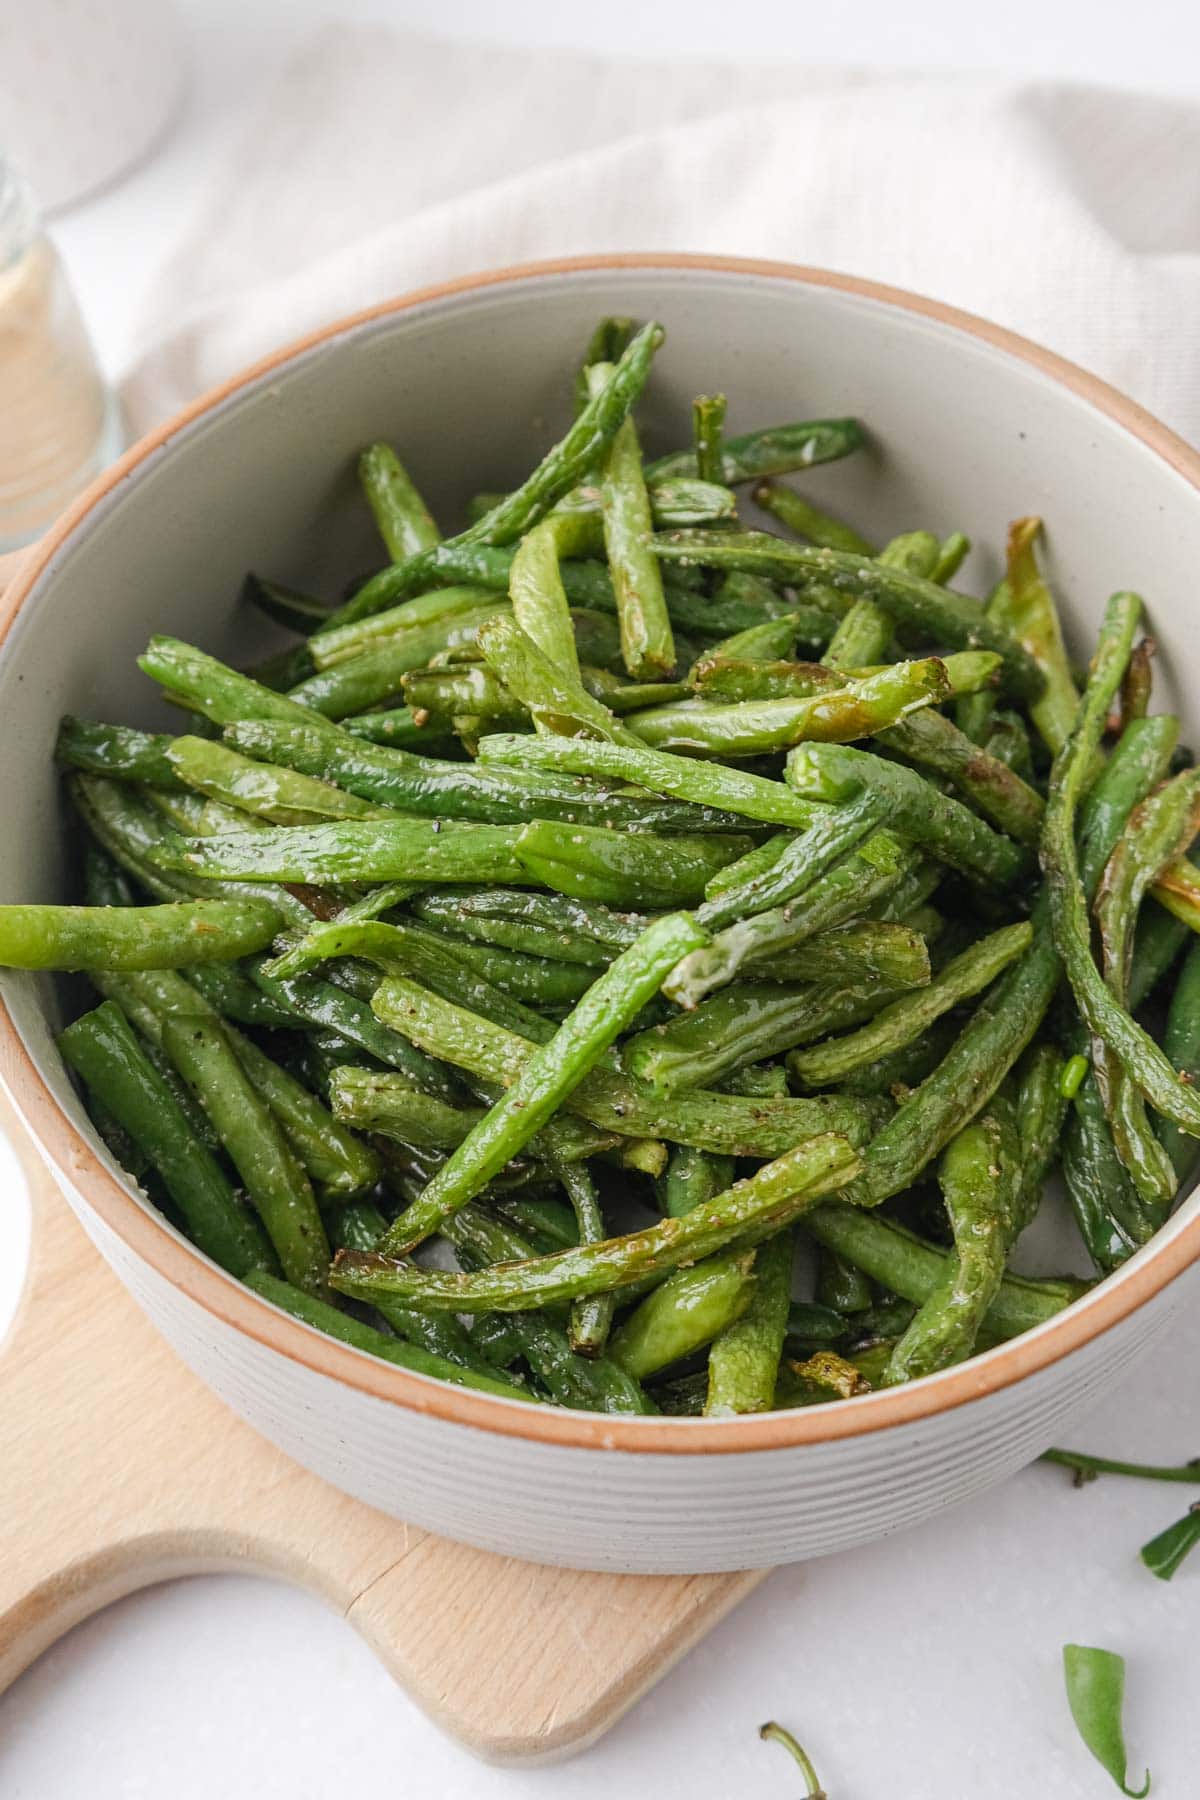 cooked green beans in serving dish on wooden board with cloth behind.